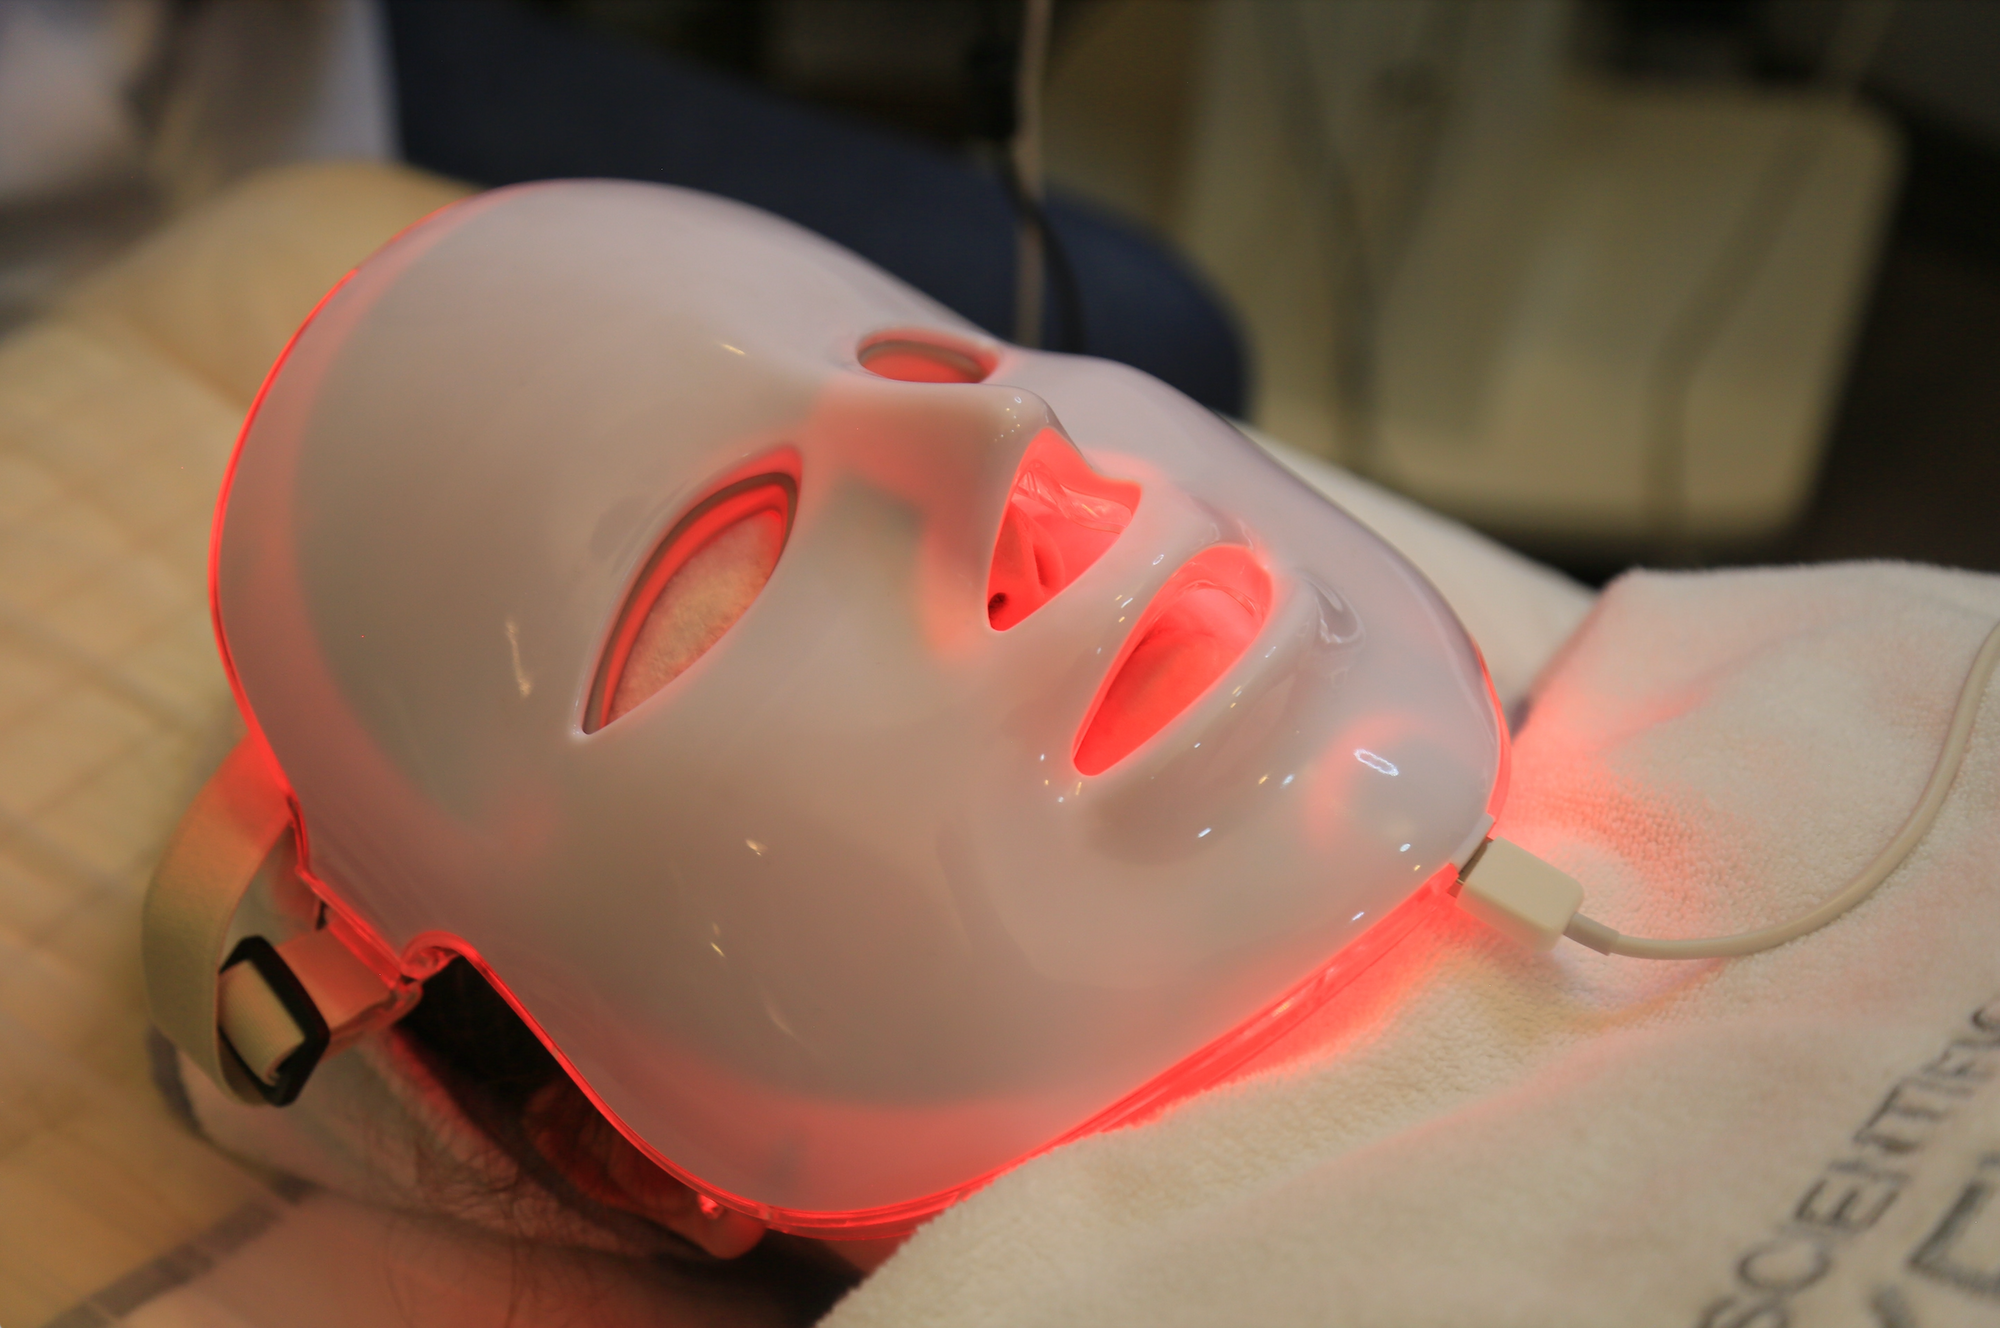 Wrinkles Creeping In? Nutriskin's LED Mask to the Rescue!